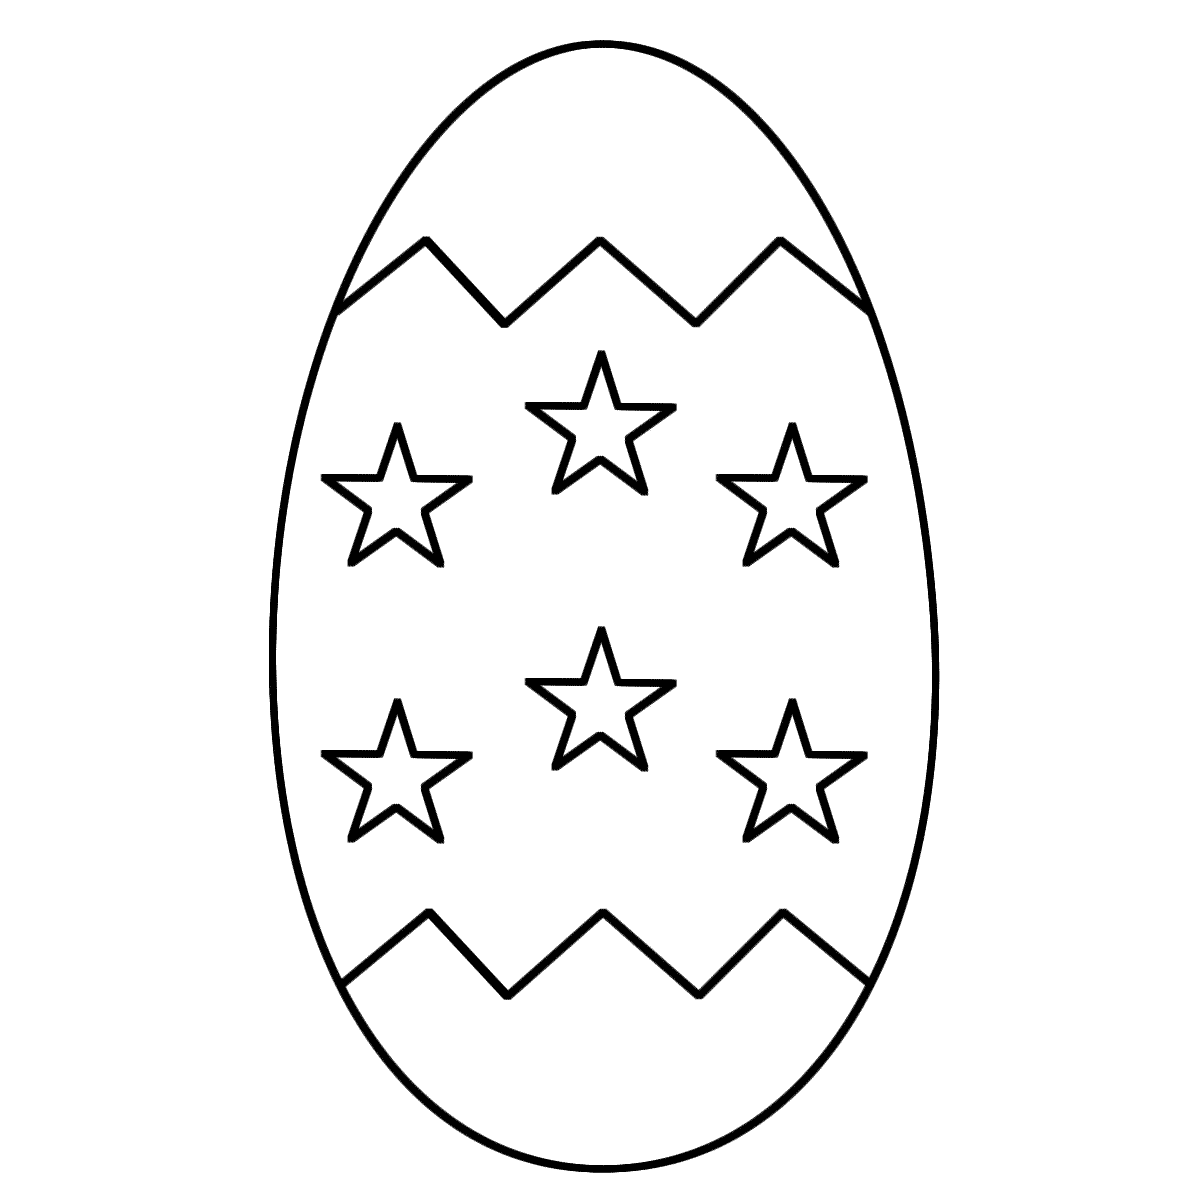 Free Coloring Pages For Easter Eggs